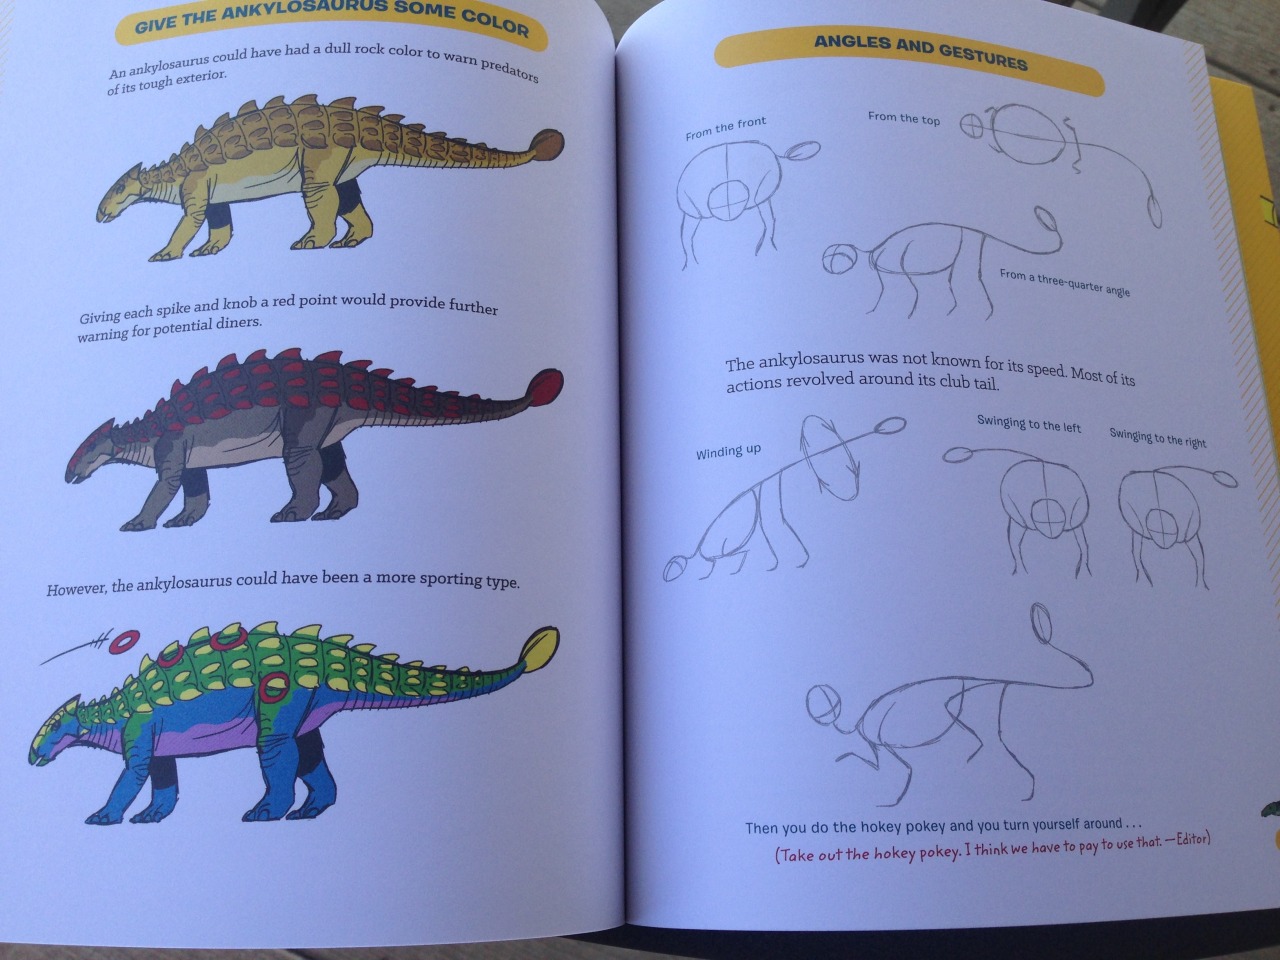 DrawASaurus Everything You Need to Know to Draw Your Favorite Dinosaurs
Epub-Ebook